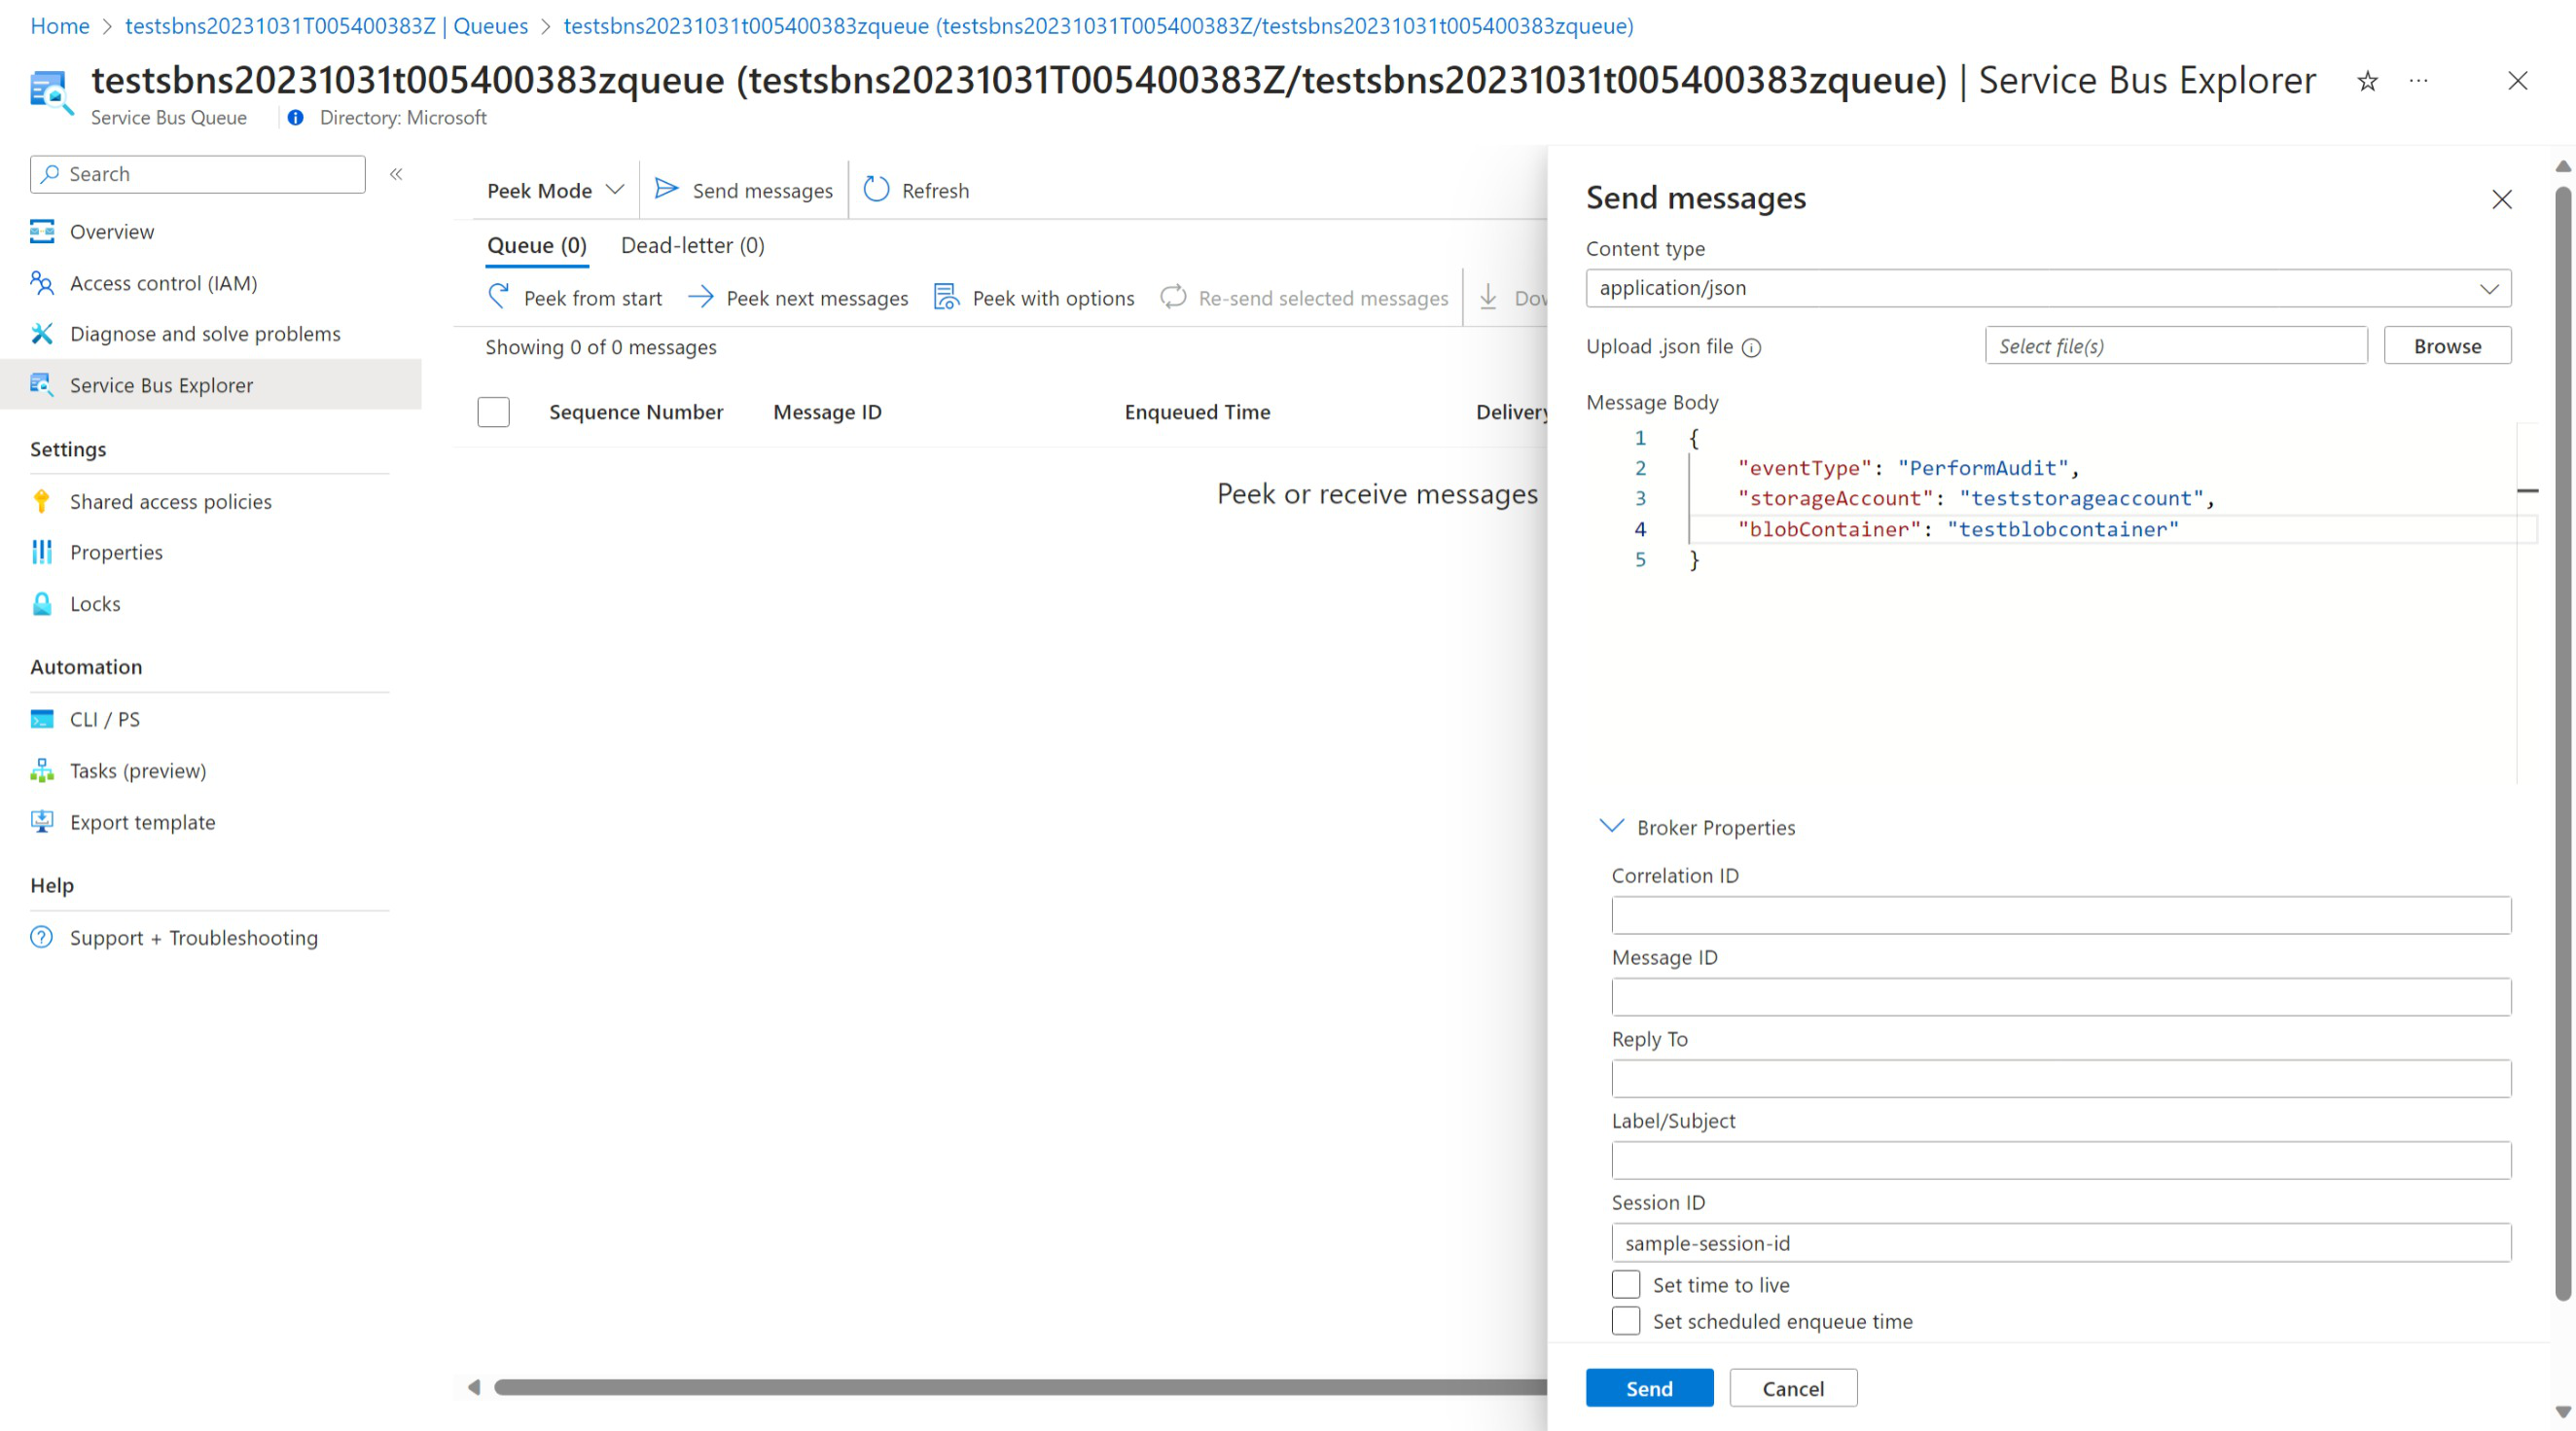 Screenshot of the Azure portal in a web browser, how to trigger an audit by adding a message to the queue.